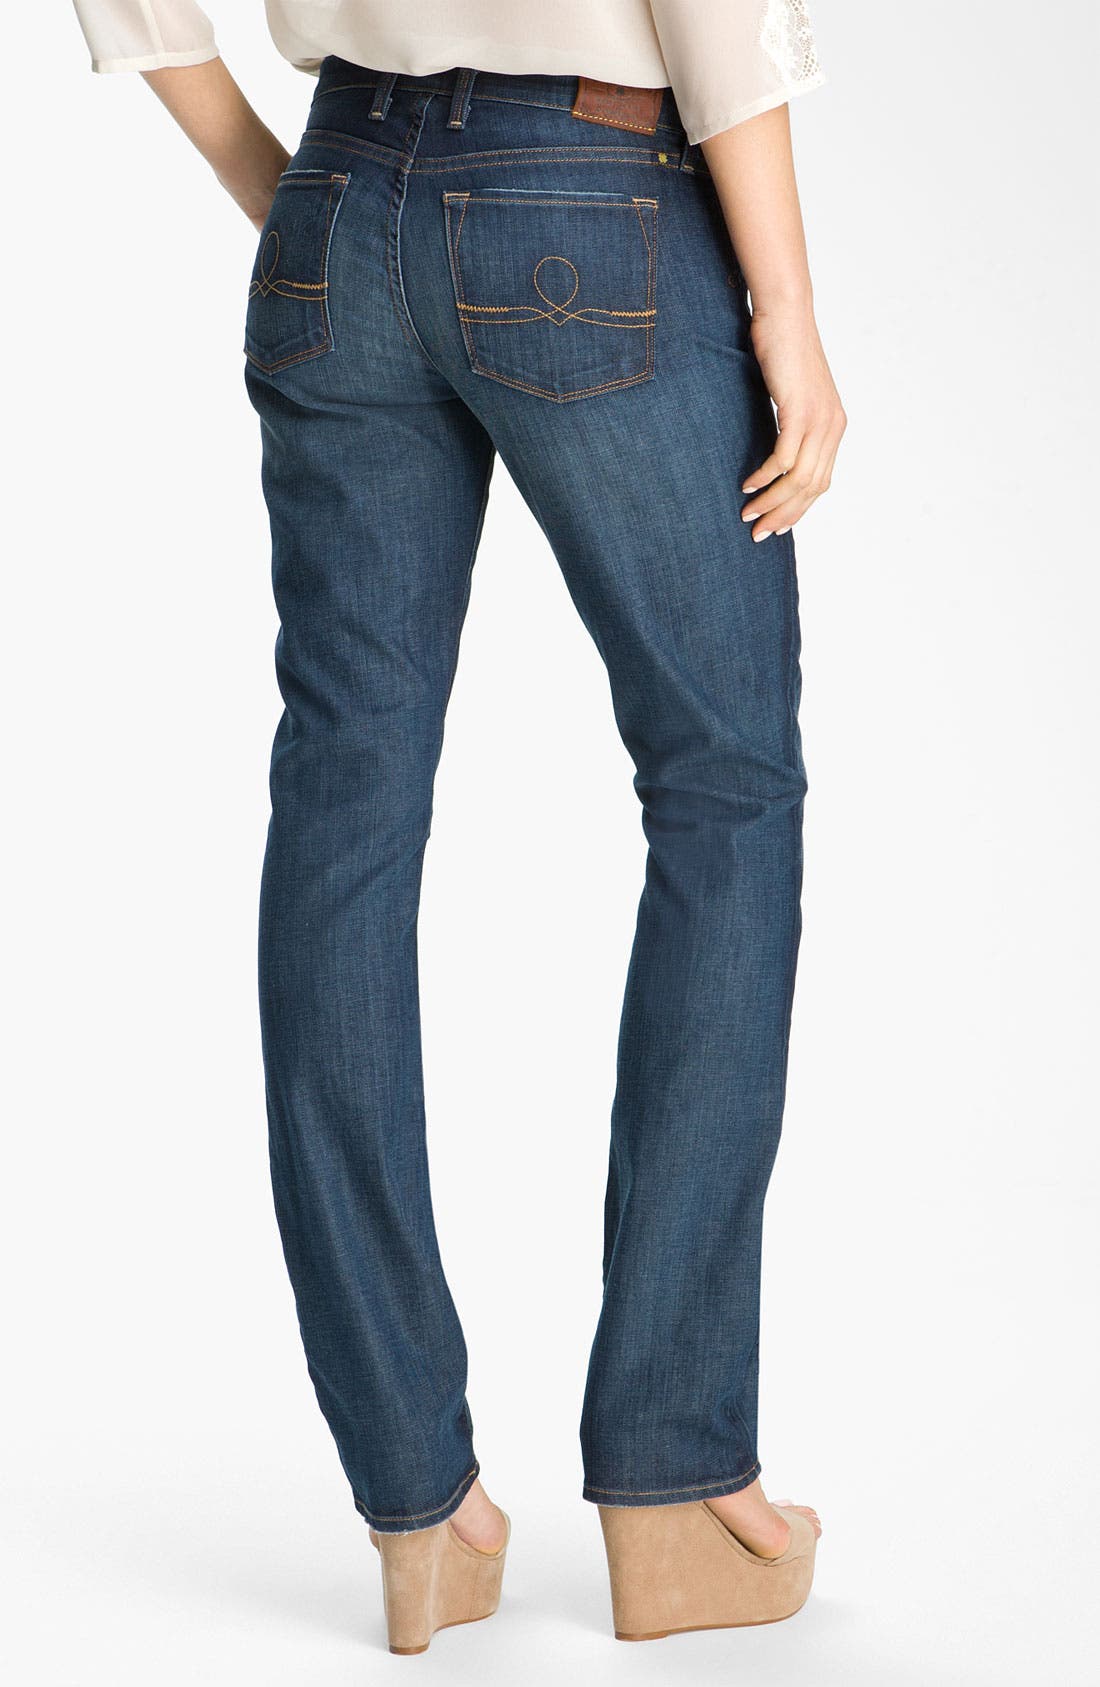 lands end pull on jeans